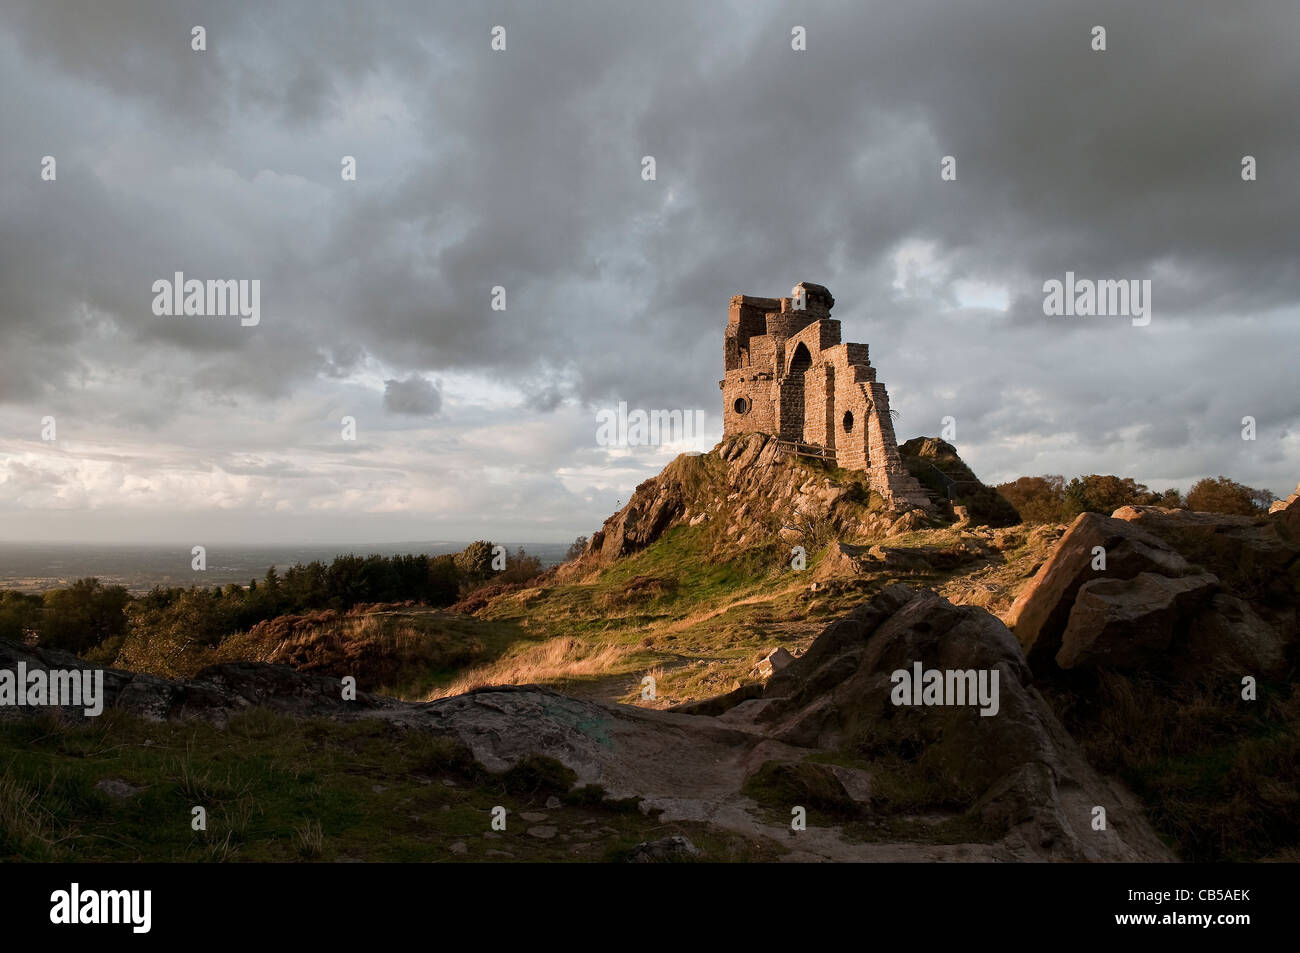 The folly of Mow Cop on the Staffordshire, Cheshire border under a brooding September sky. Stock Photo